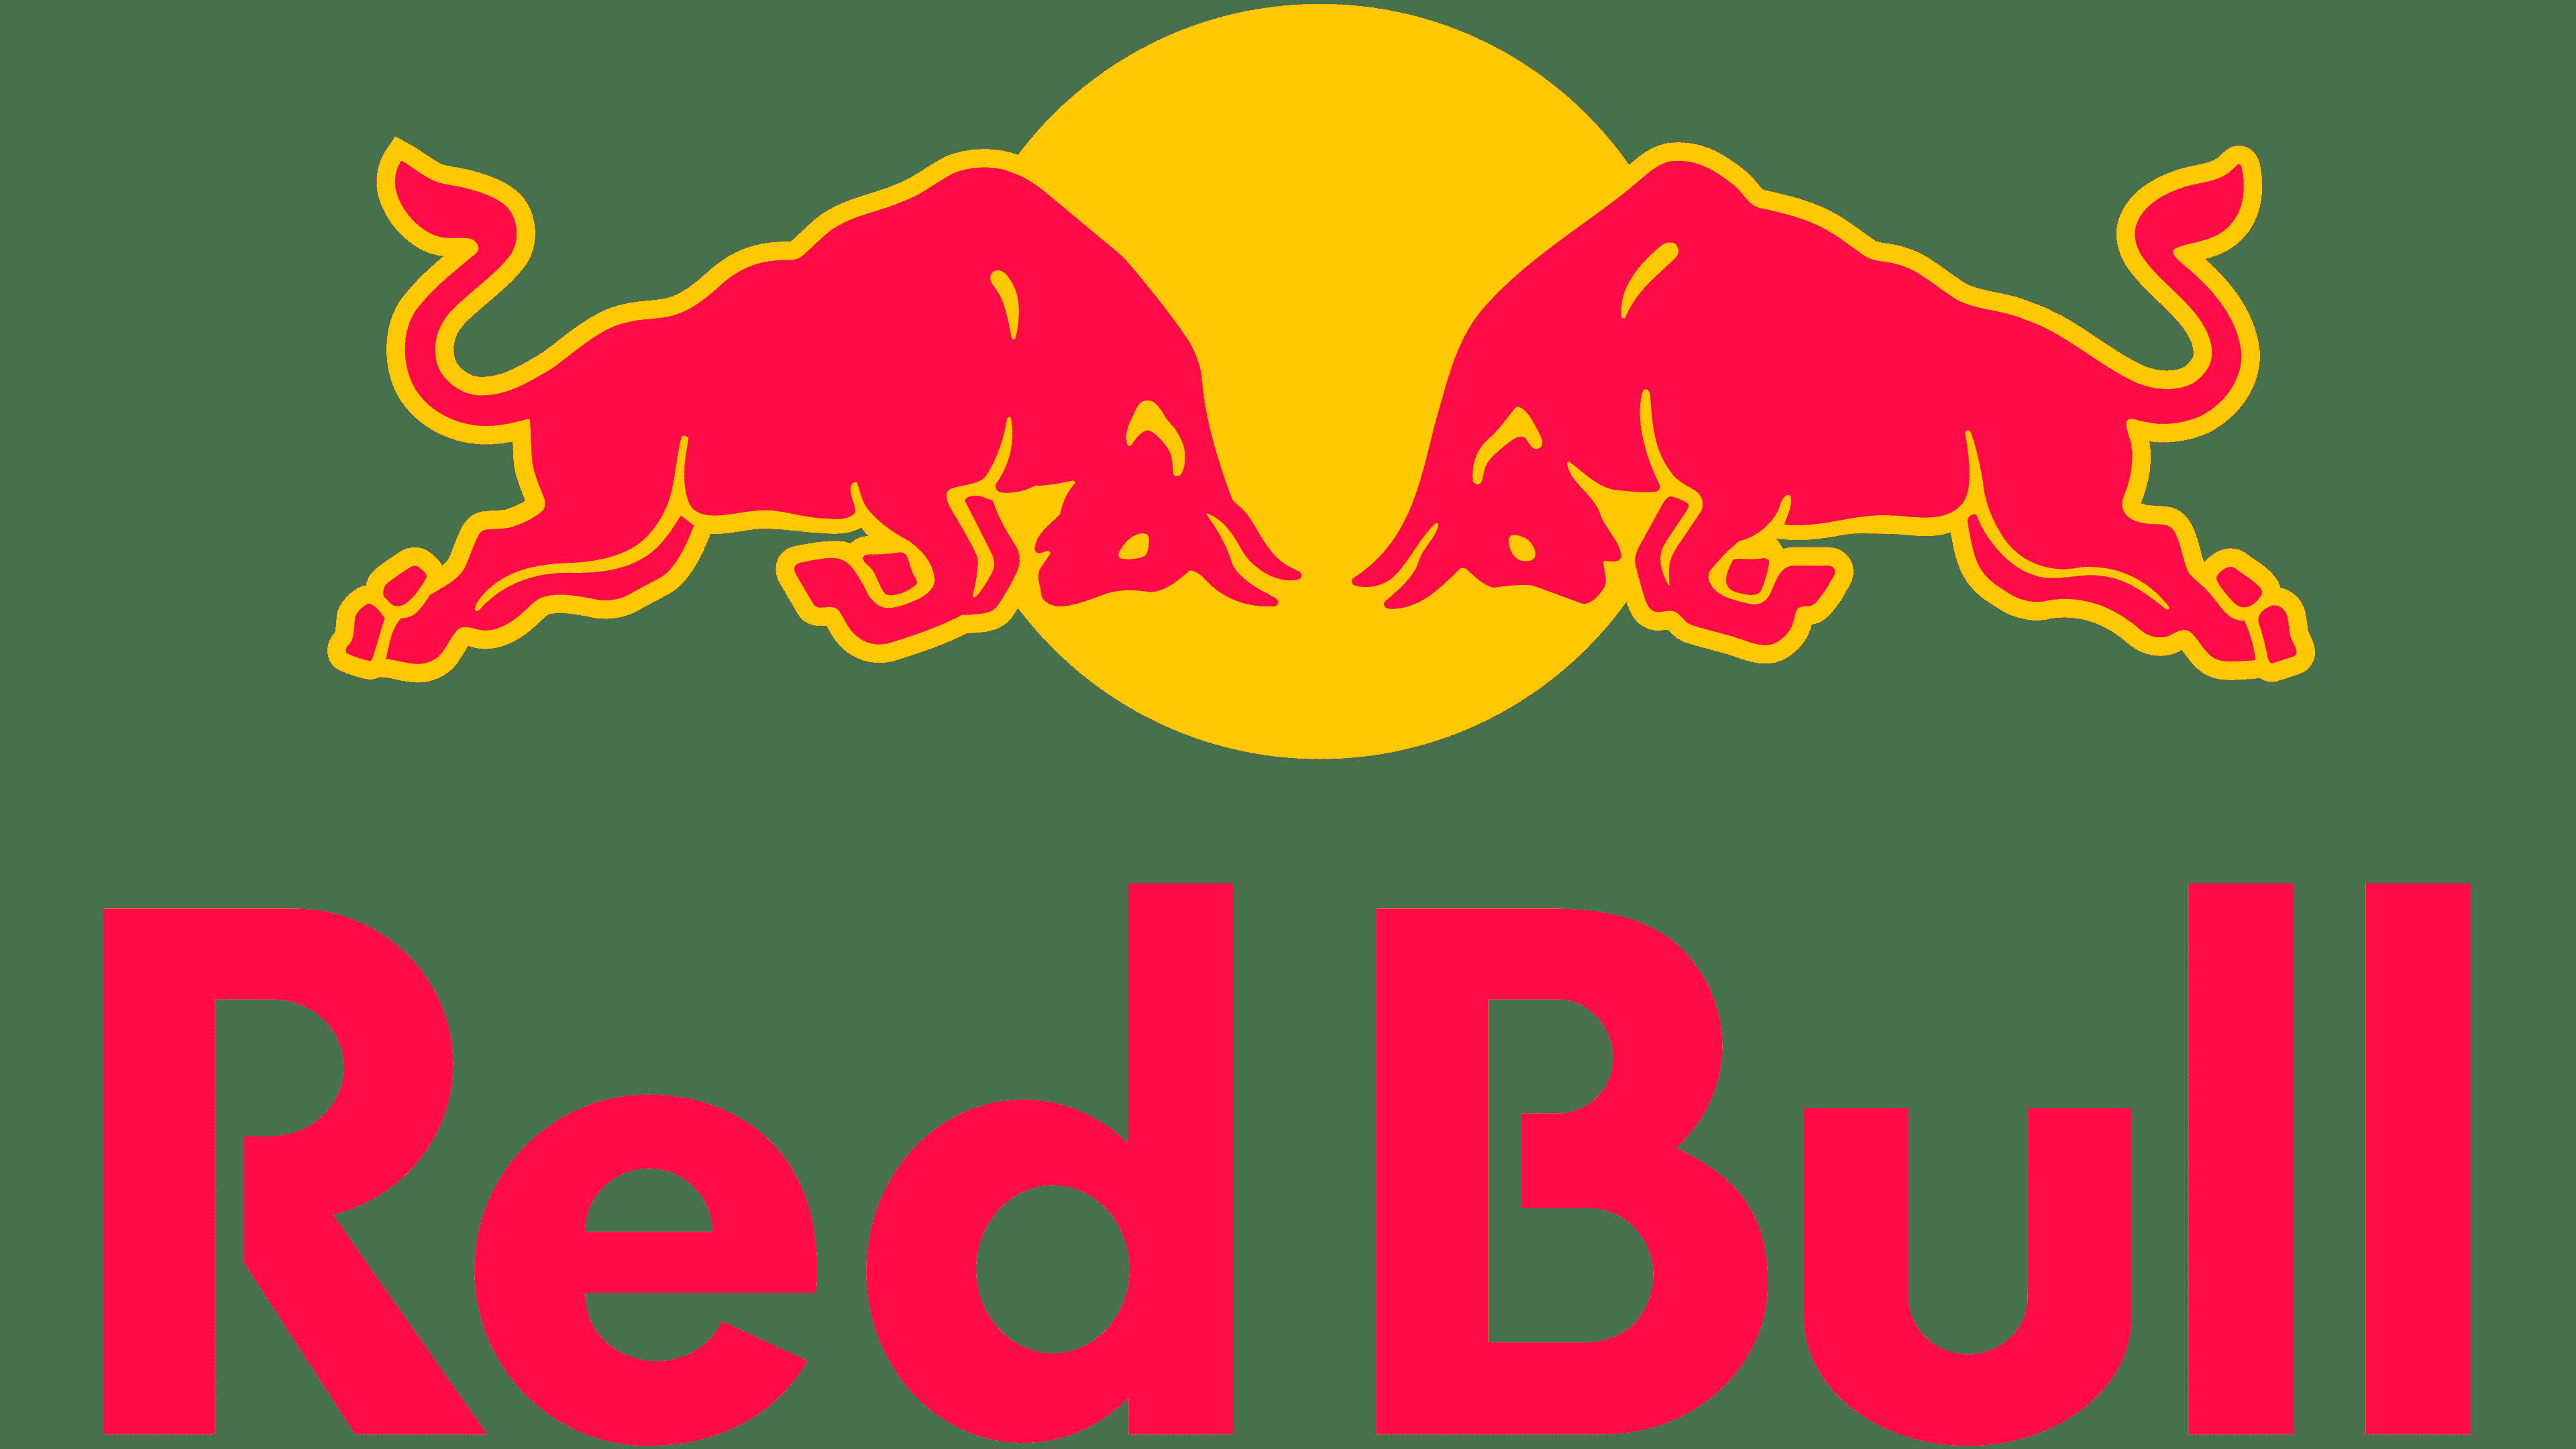 Red Bull Logo: A bull symbolizing strength, confidence, stability, and stamina, Austrian brand. 3840x2160 4K Wallpaper.